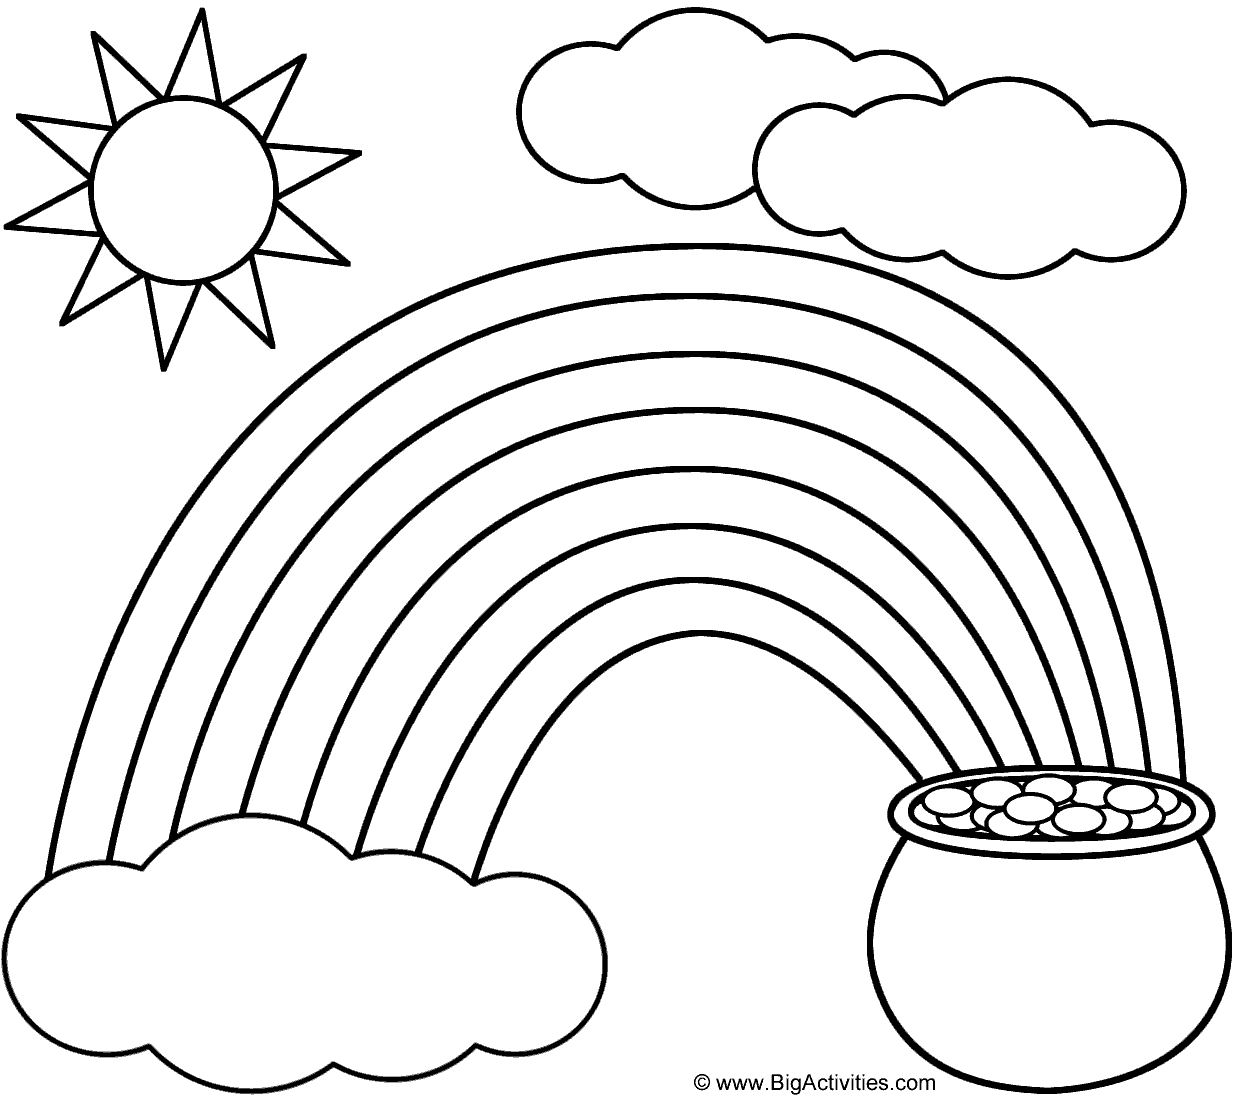 Rainbow, Pot of Gold, Sun, and Clouds - Coloring Page (St ...